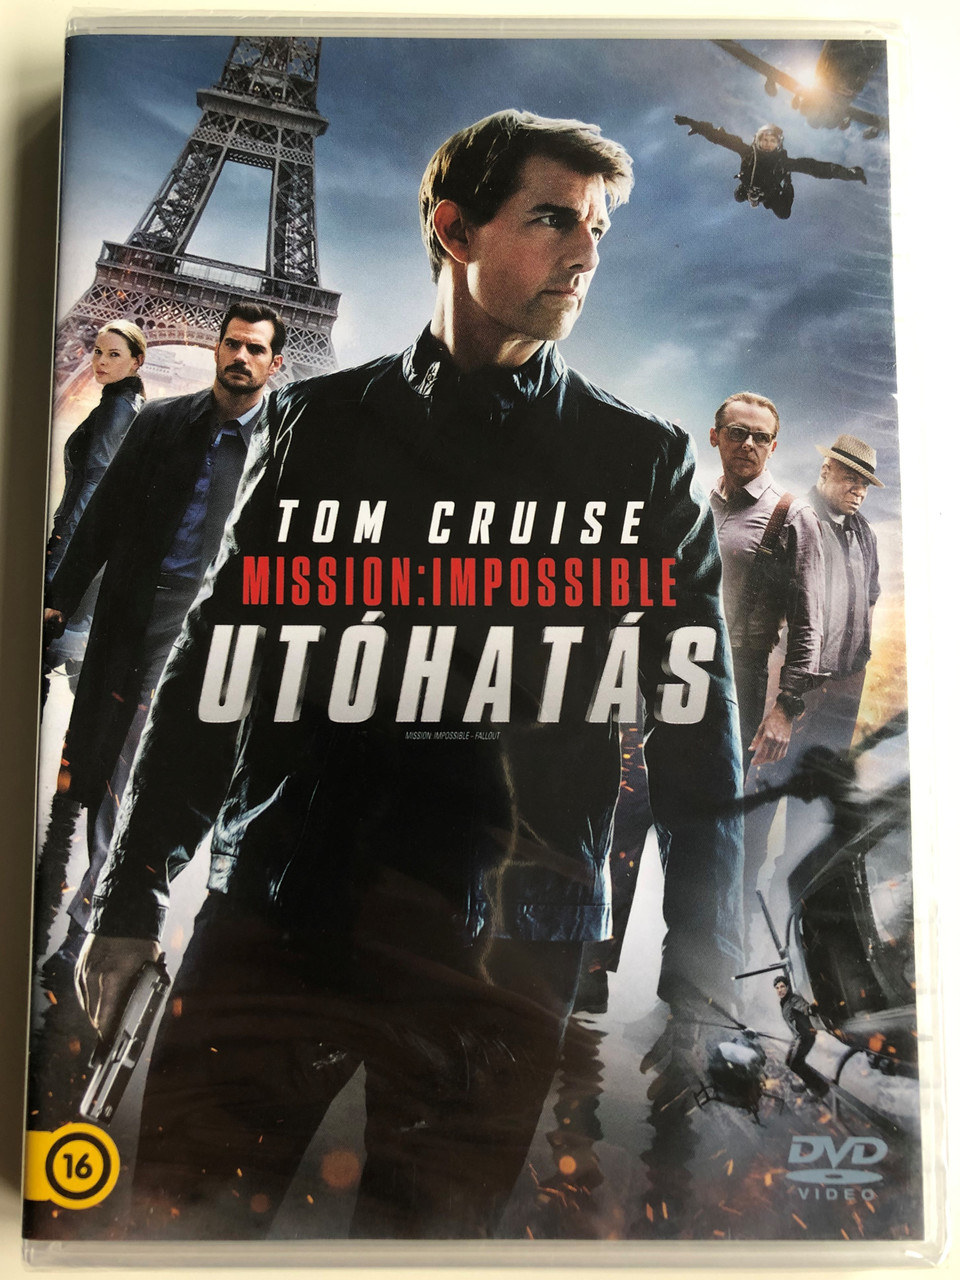 Mission Impossible - Fallout DVD 2018 Mission Impossible - Utóhatás /  Directed by Christopher McQuarrie / Starring: Tom Cruise, Henry Caill, Ving  Rhames, Simon Pegg - bibleinmylanguage